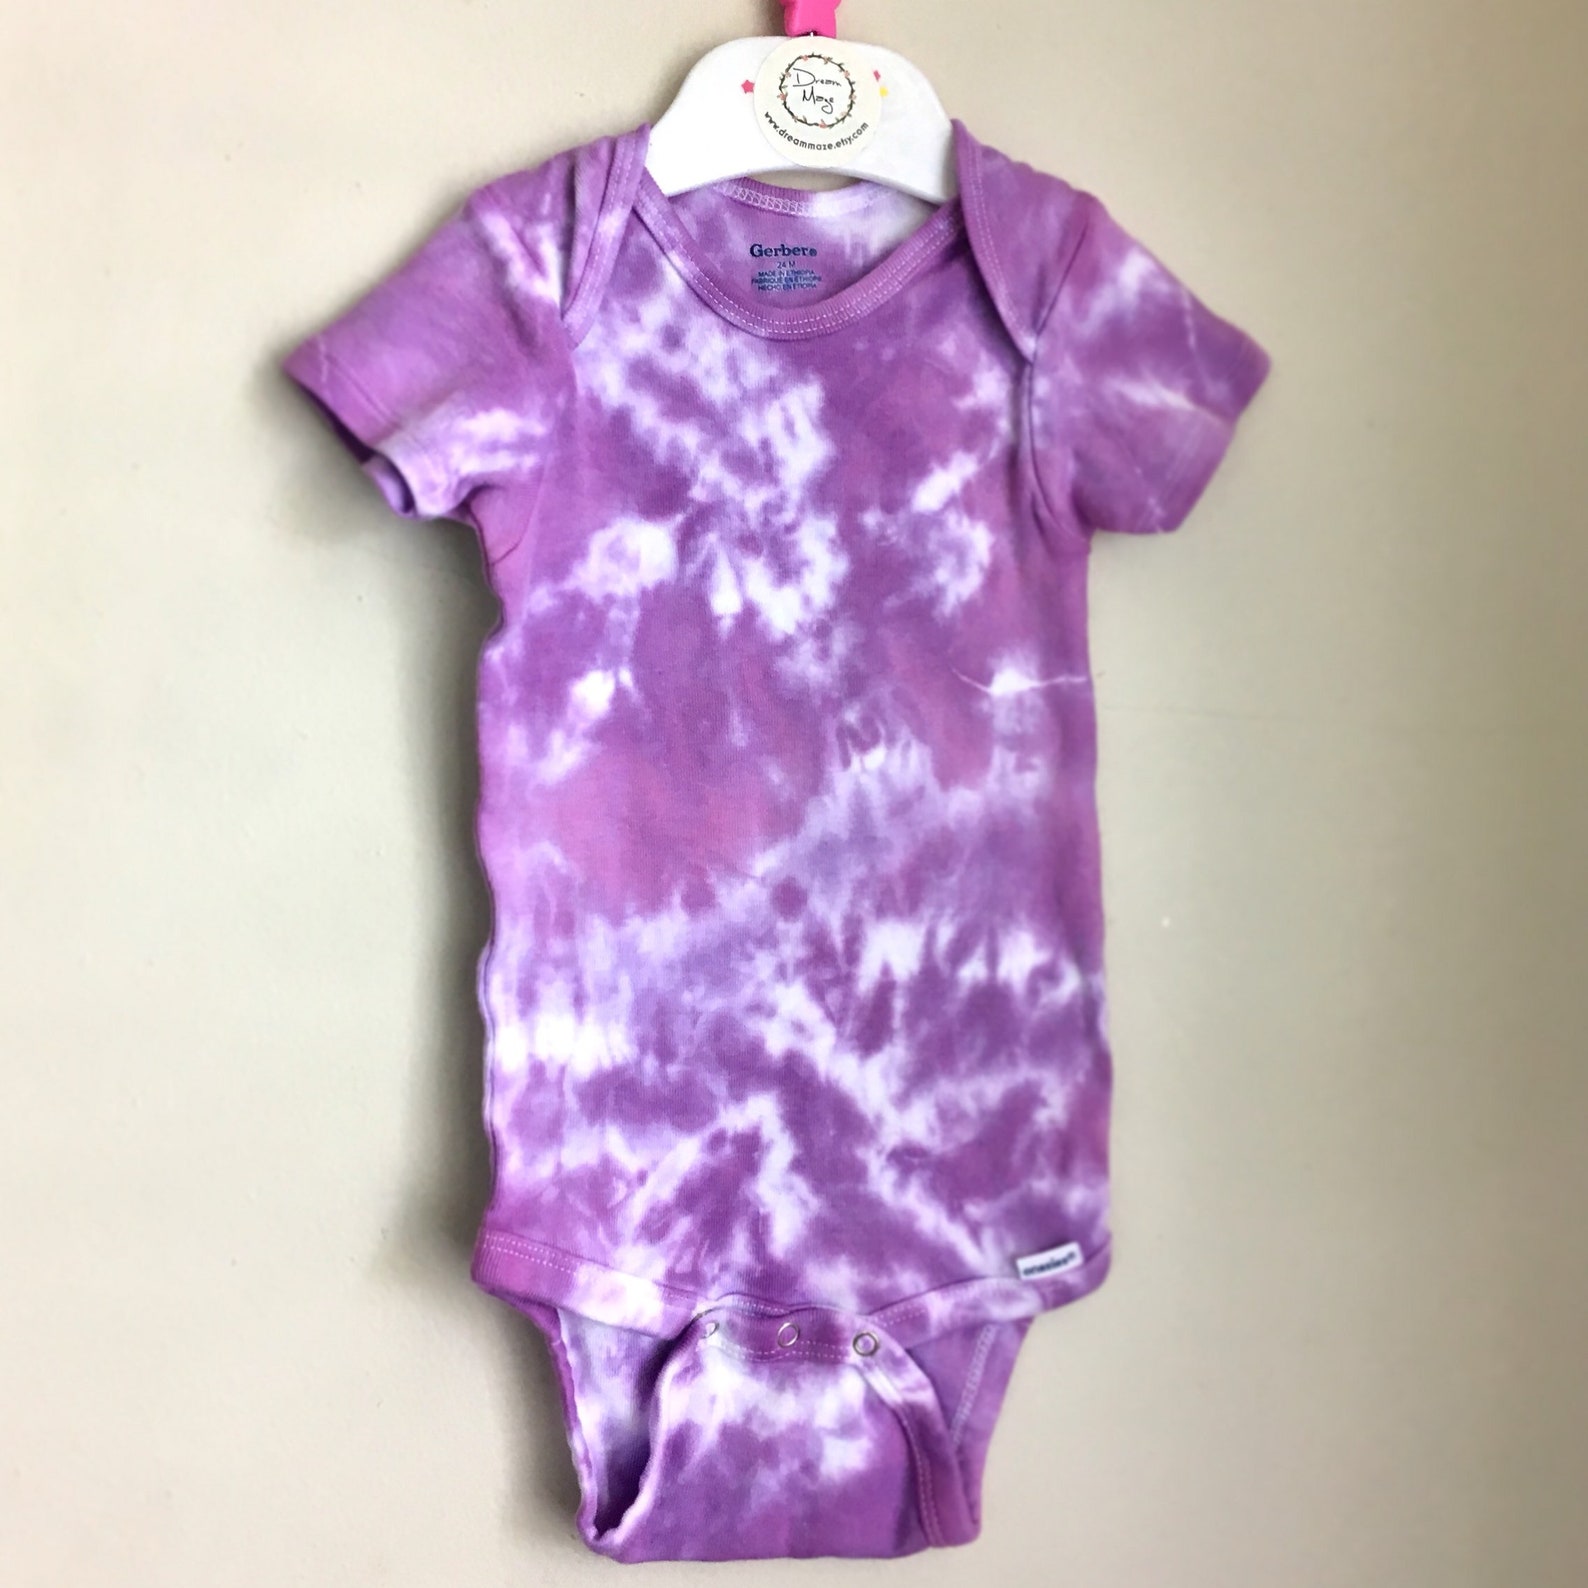 Hand Dyed Purple Baby Onesie or T-Shirt / Toddler Tee / Infant | Etsy